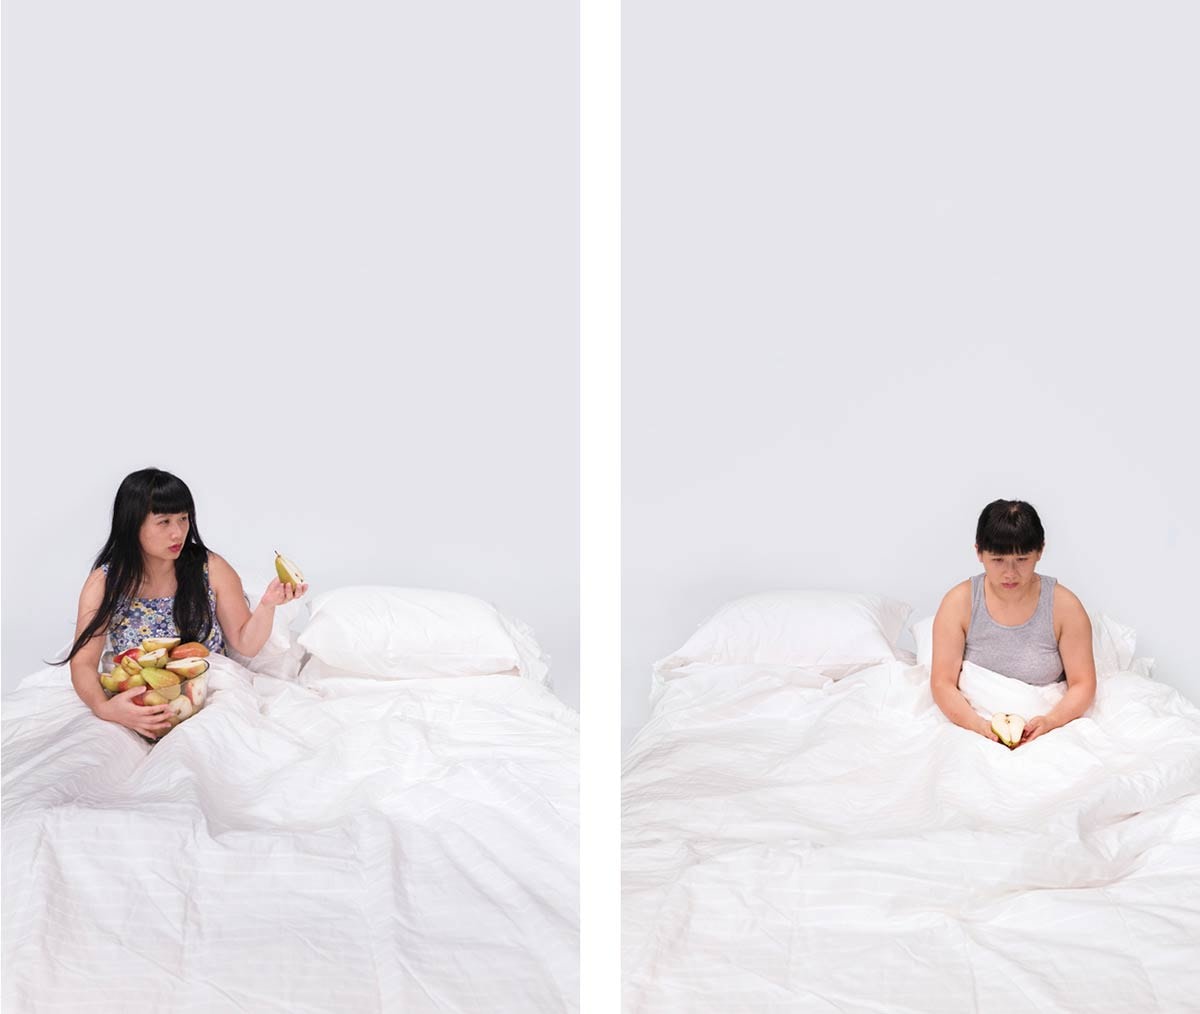 CHUN HUA CATHERINE DONG | ABSENT HUSBAND&nbsp;| INKJET PRINT | 70 X 40 INCHES | 2012